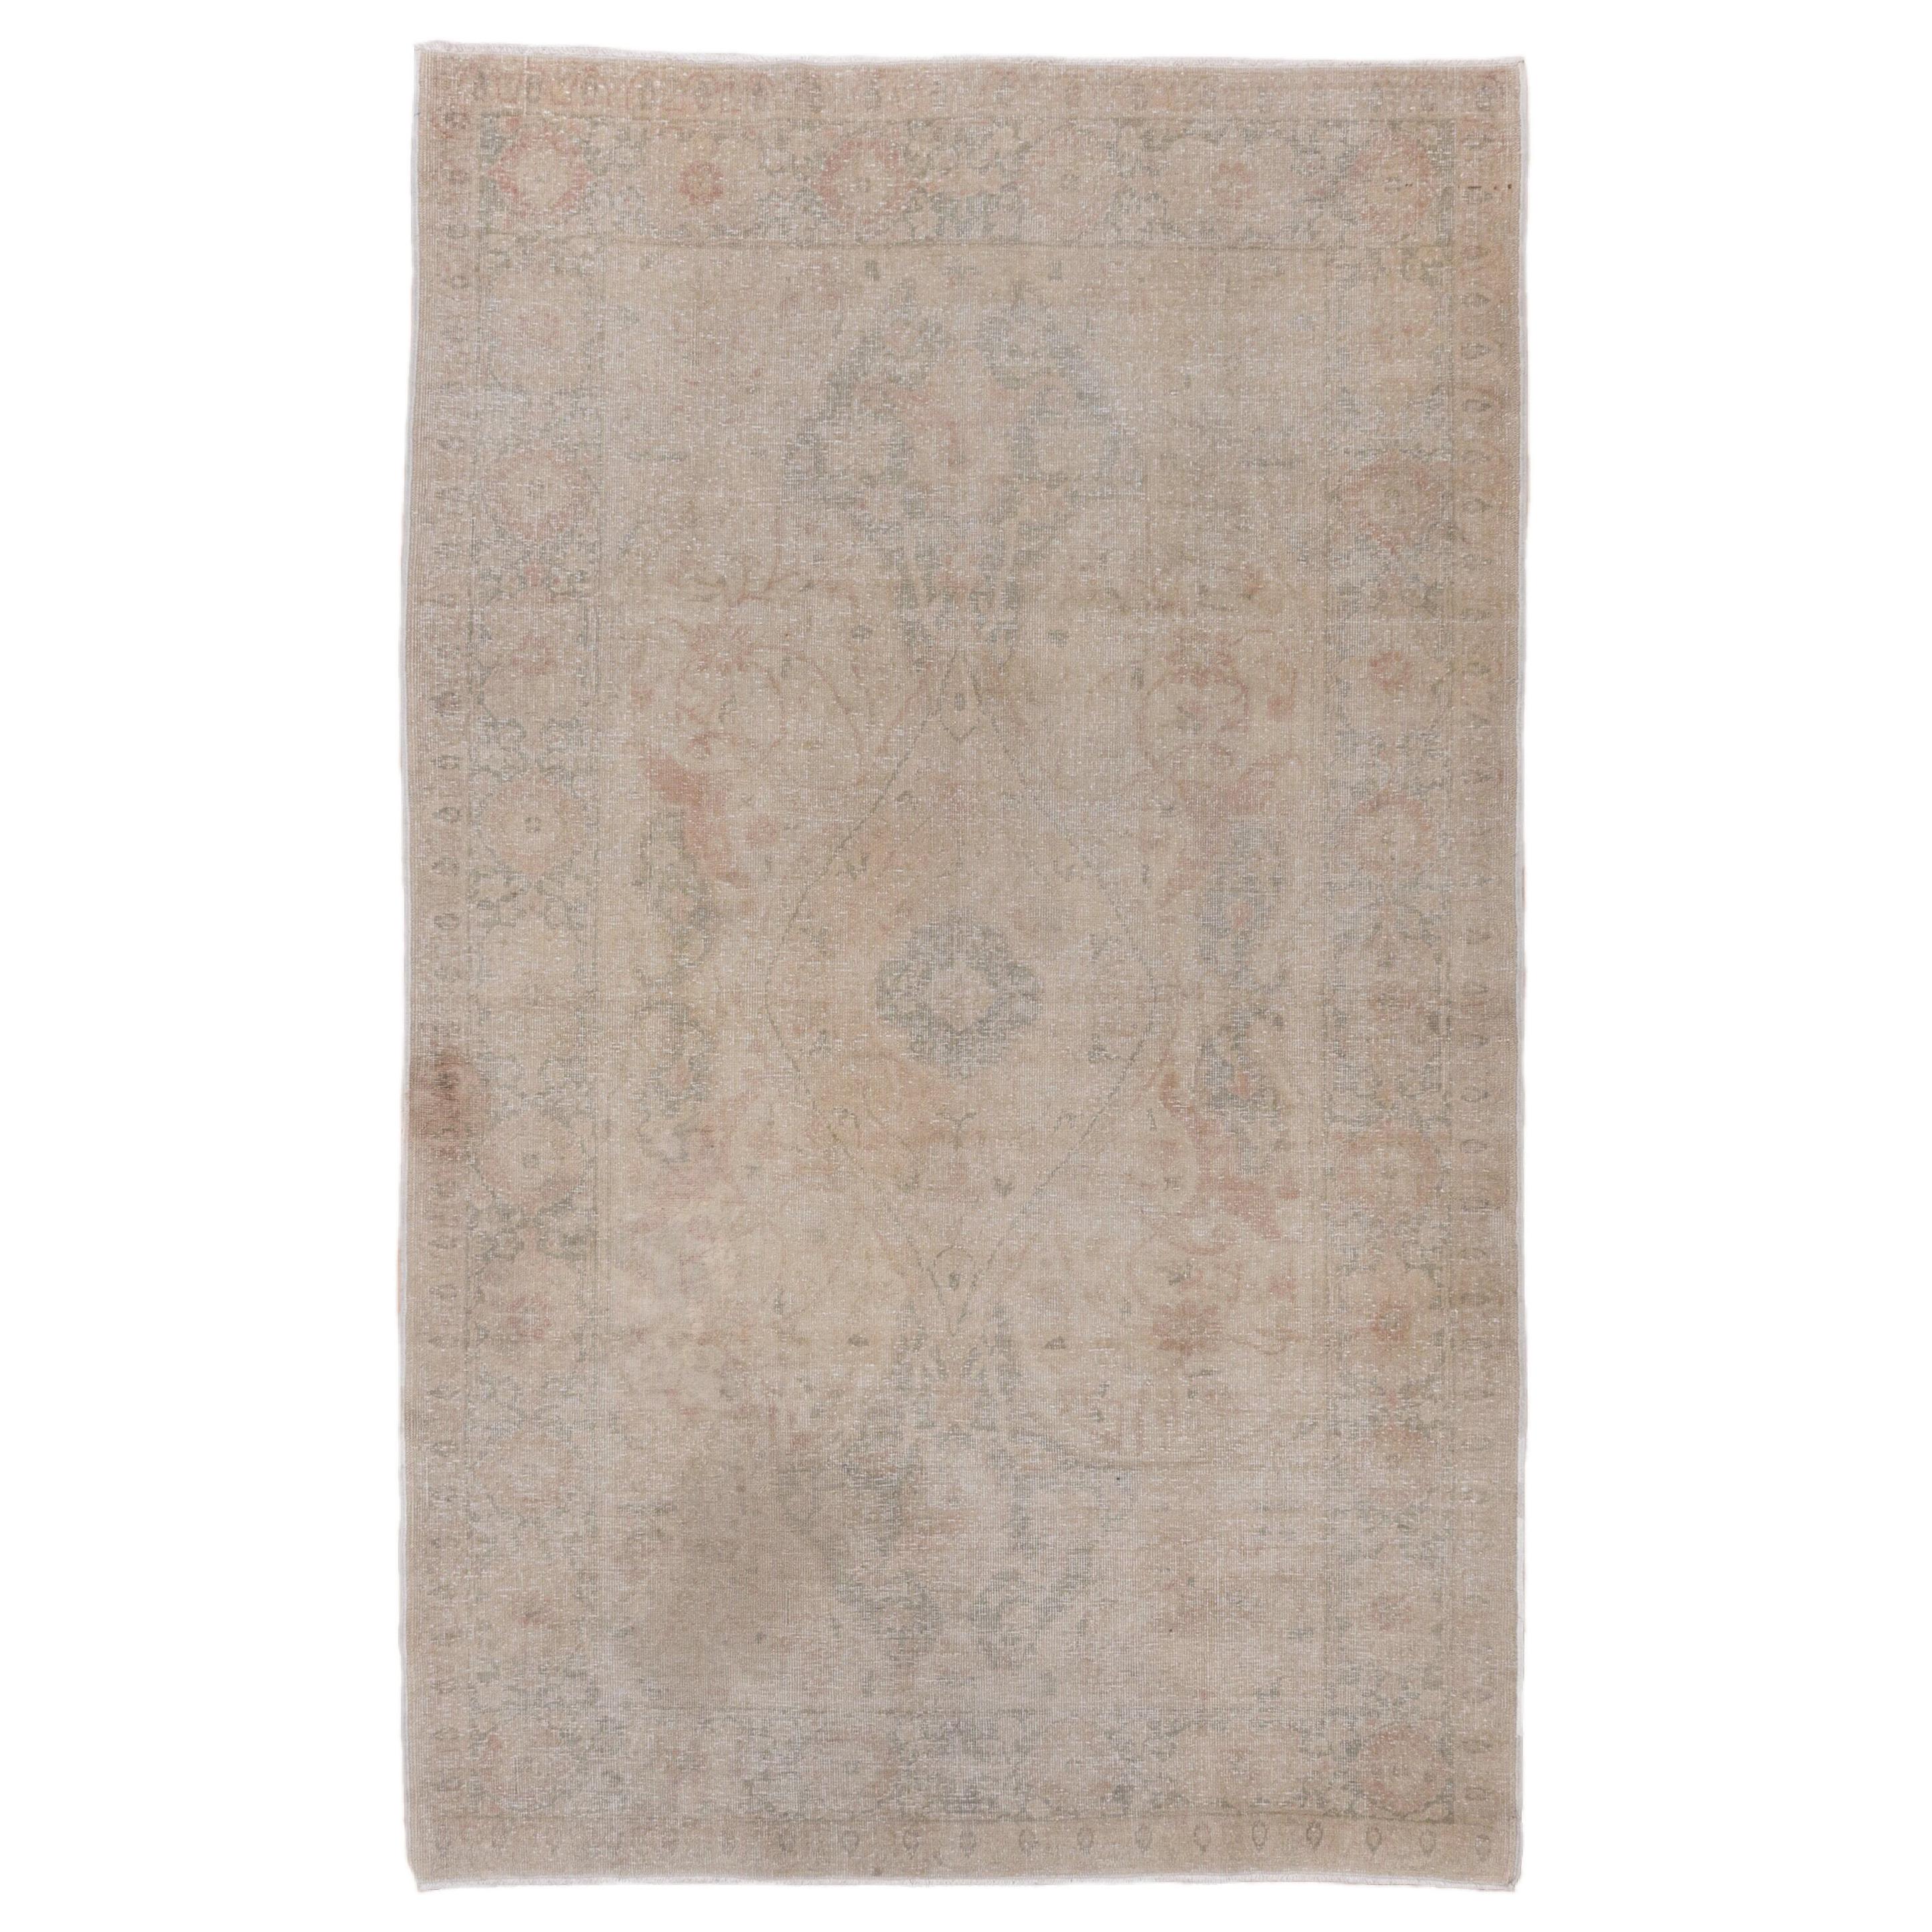 Oushak Rug with a Soft and Light Palette